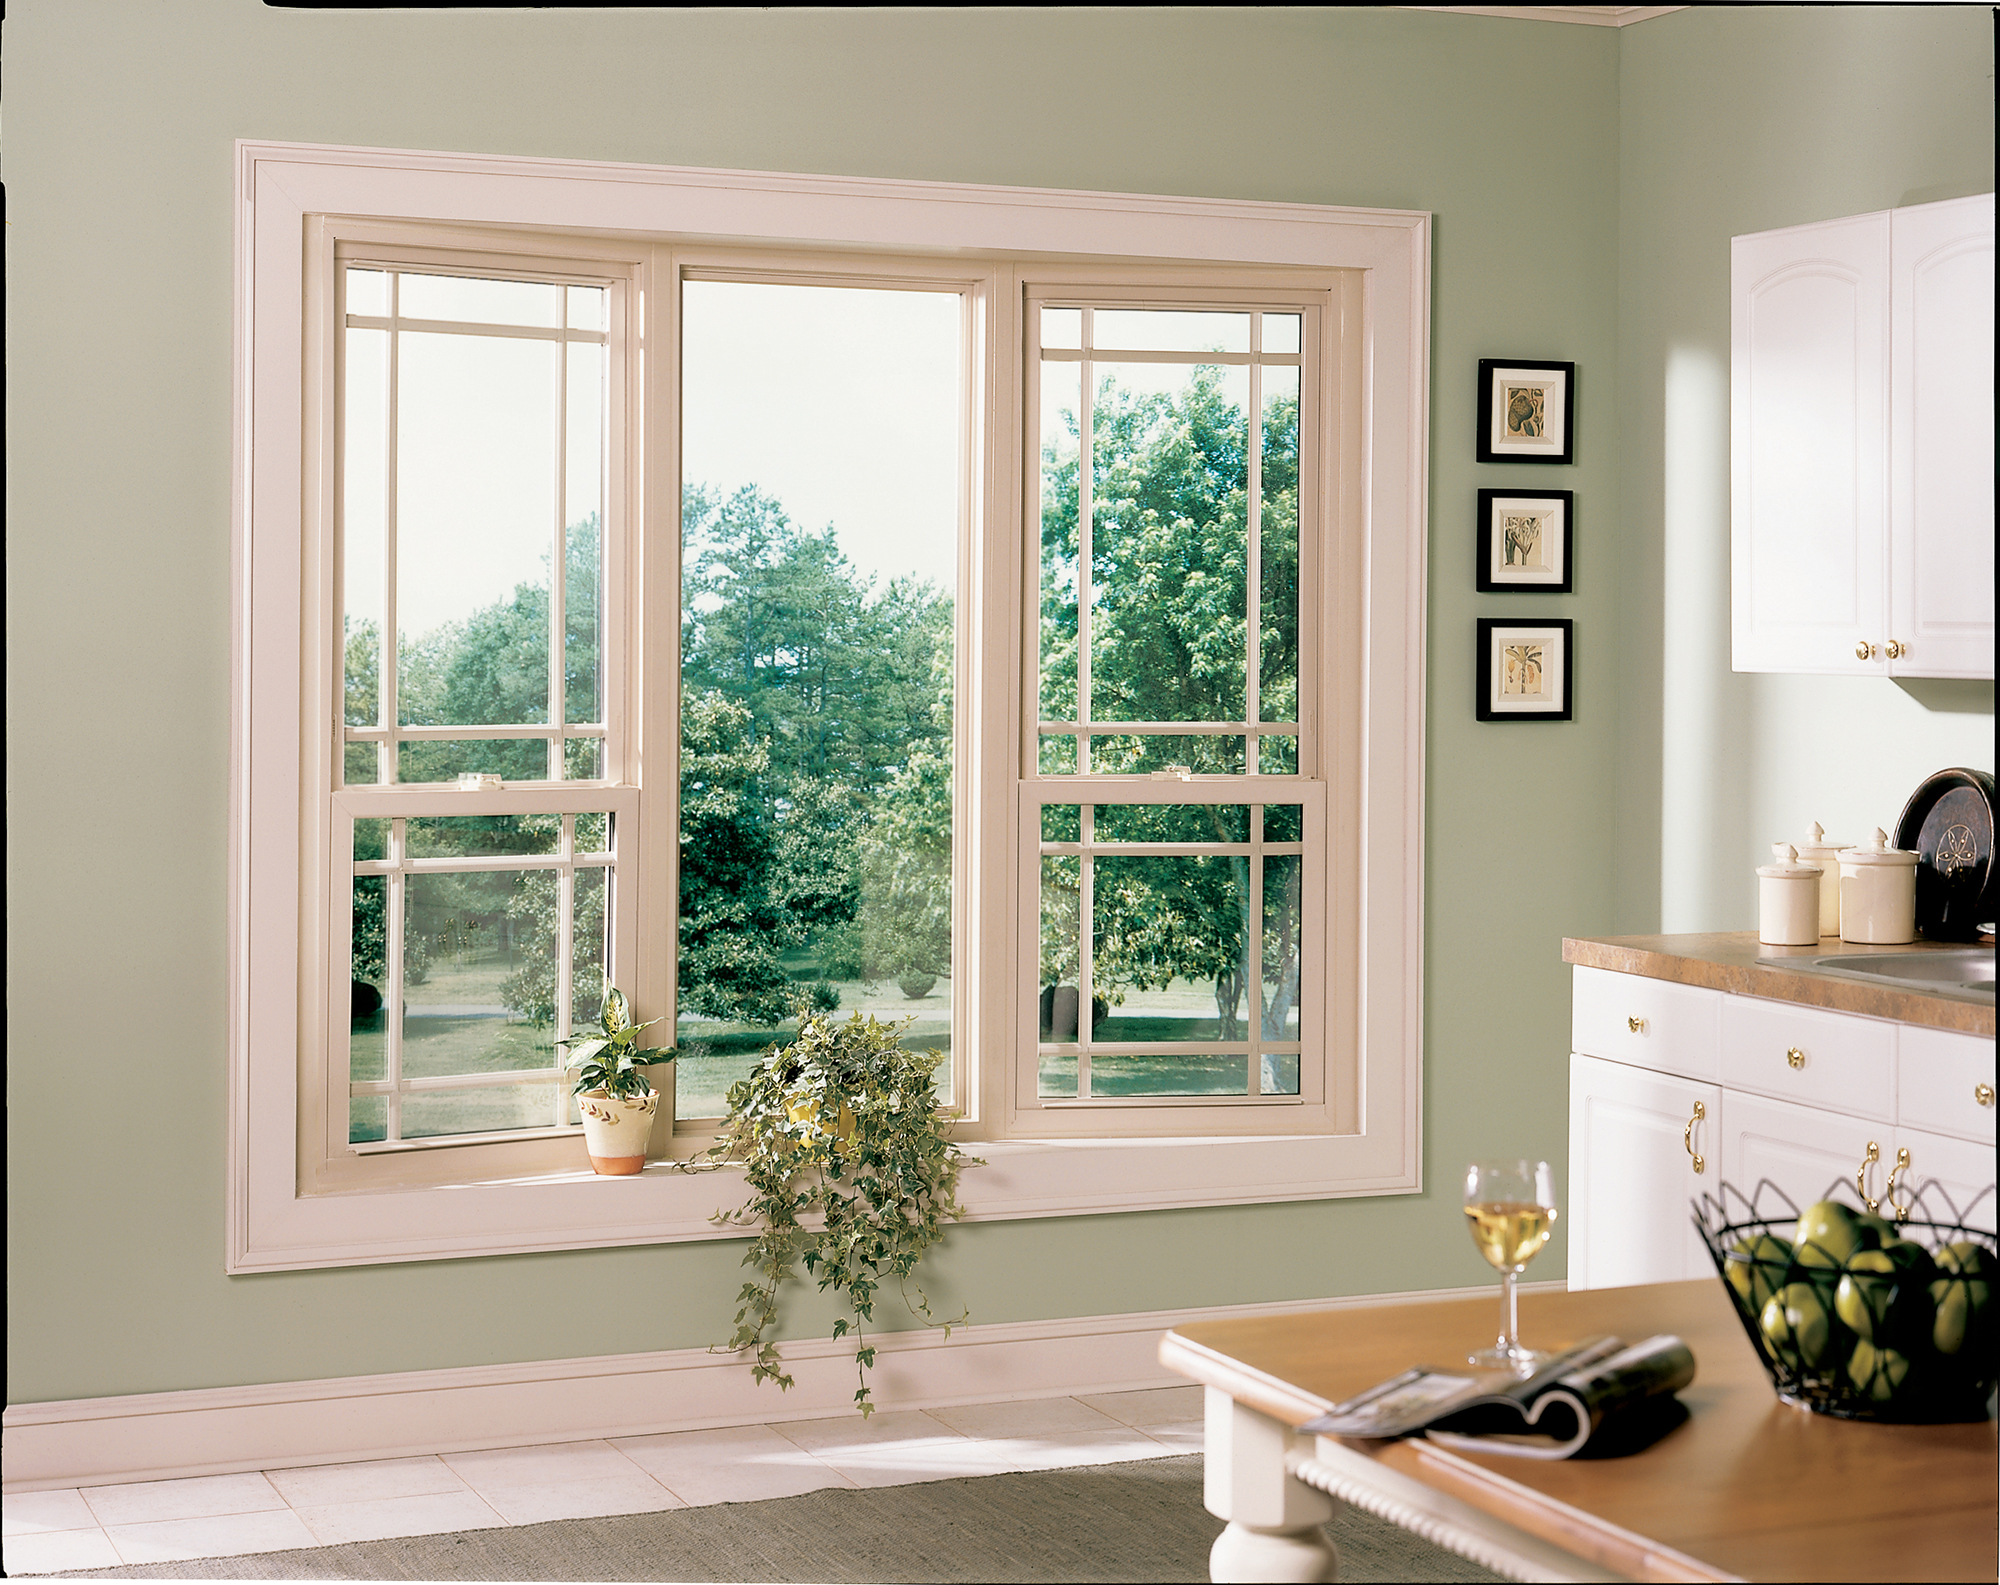 A perfect pair of craftsman double hung windows.